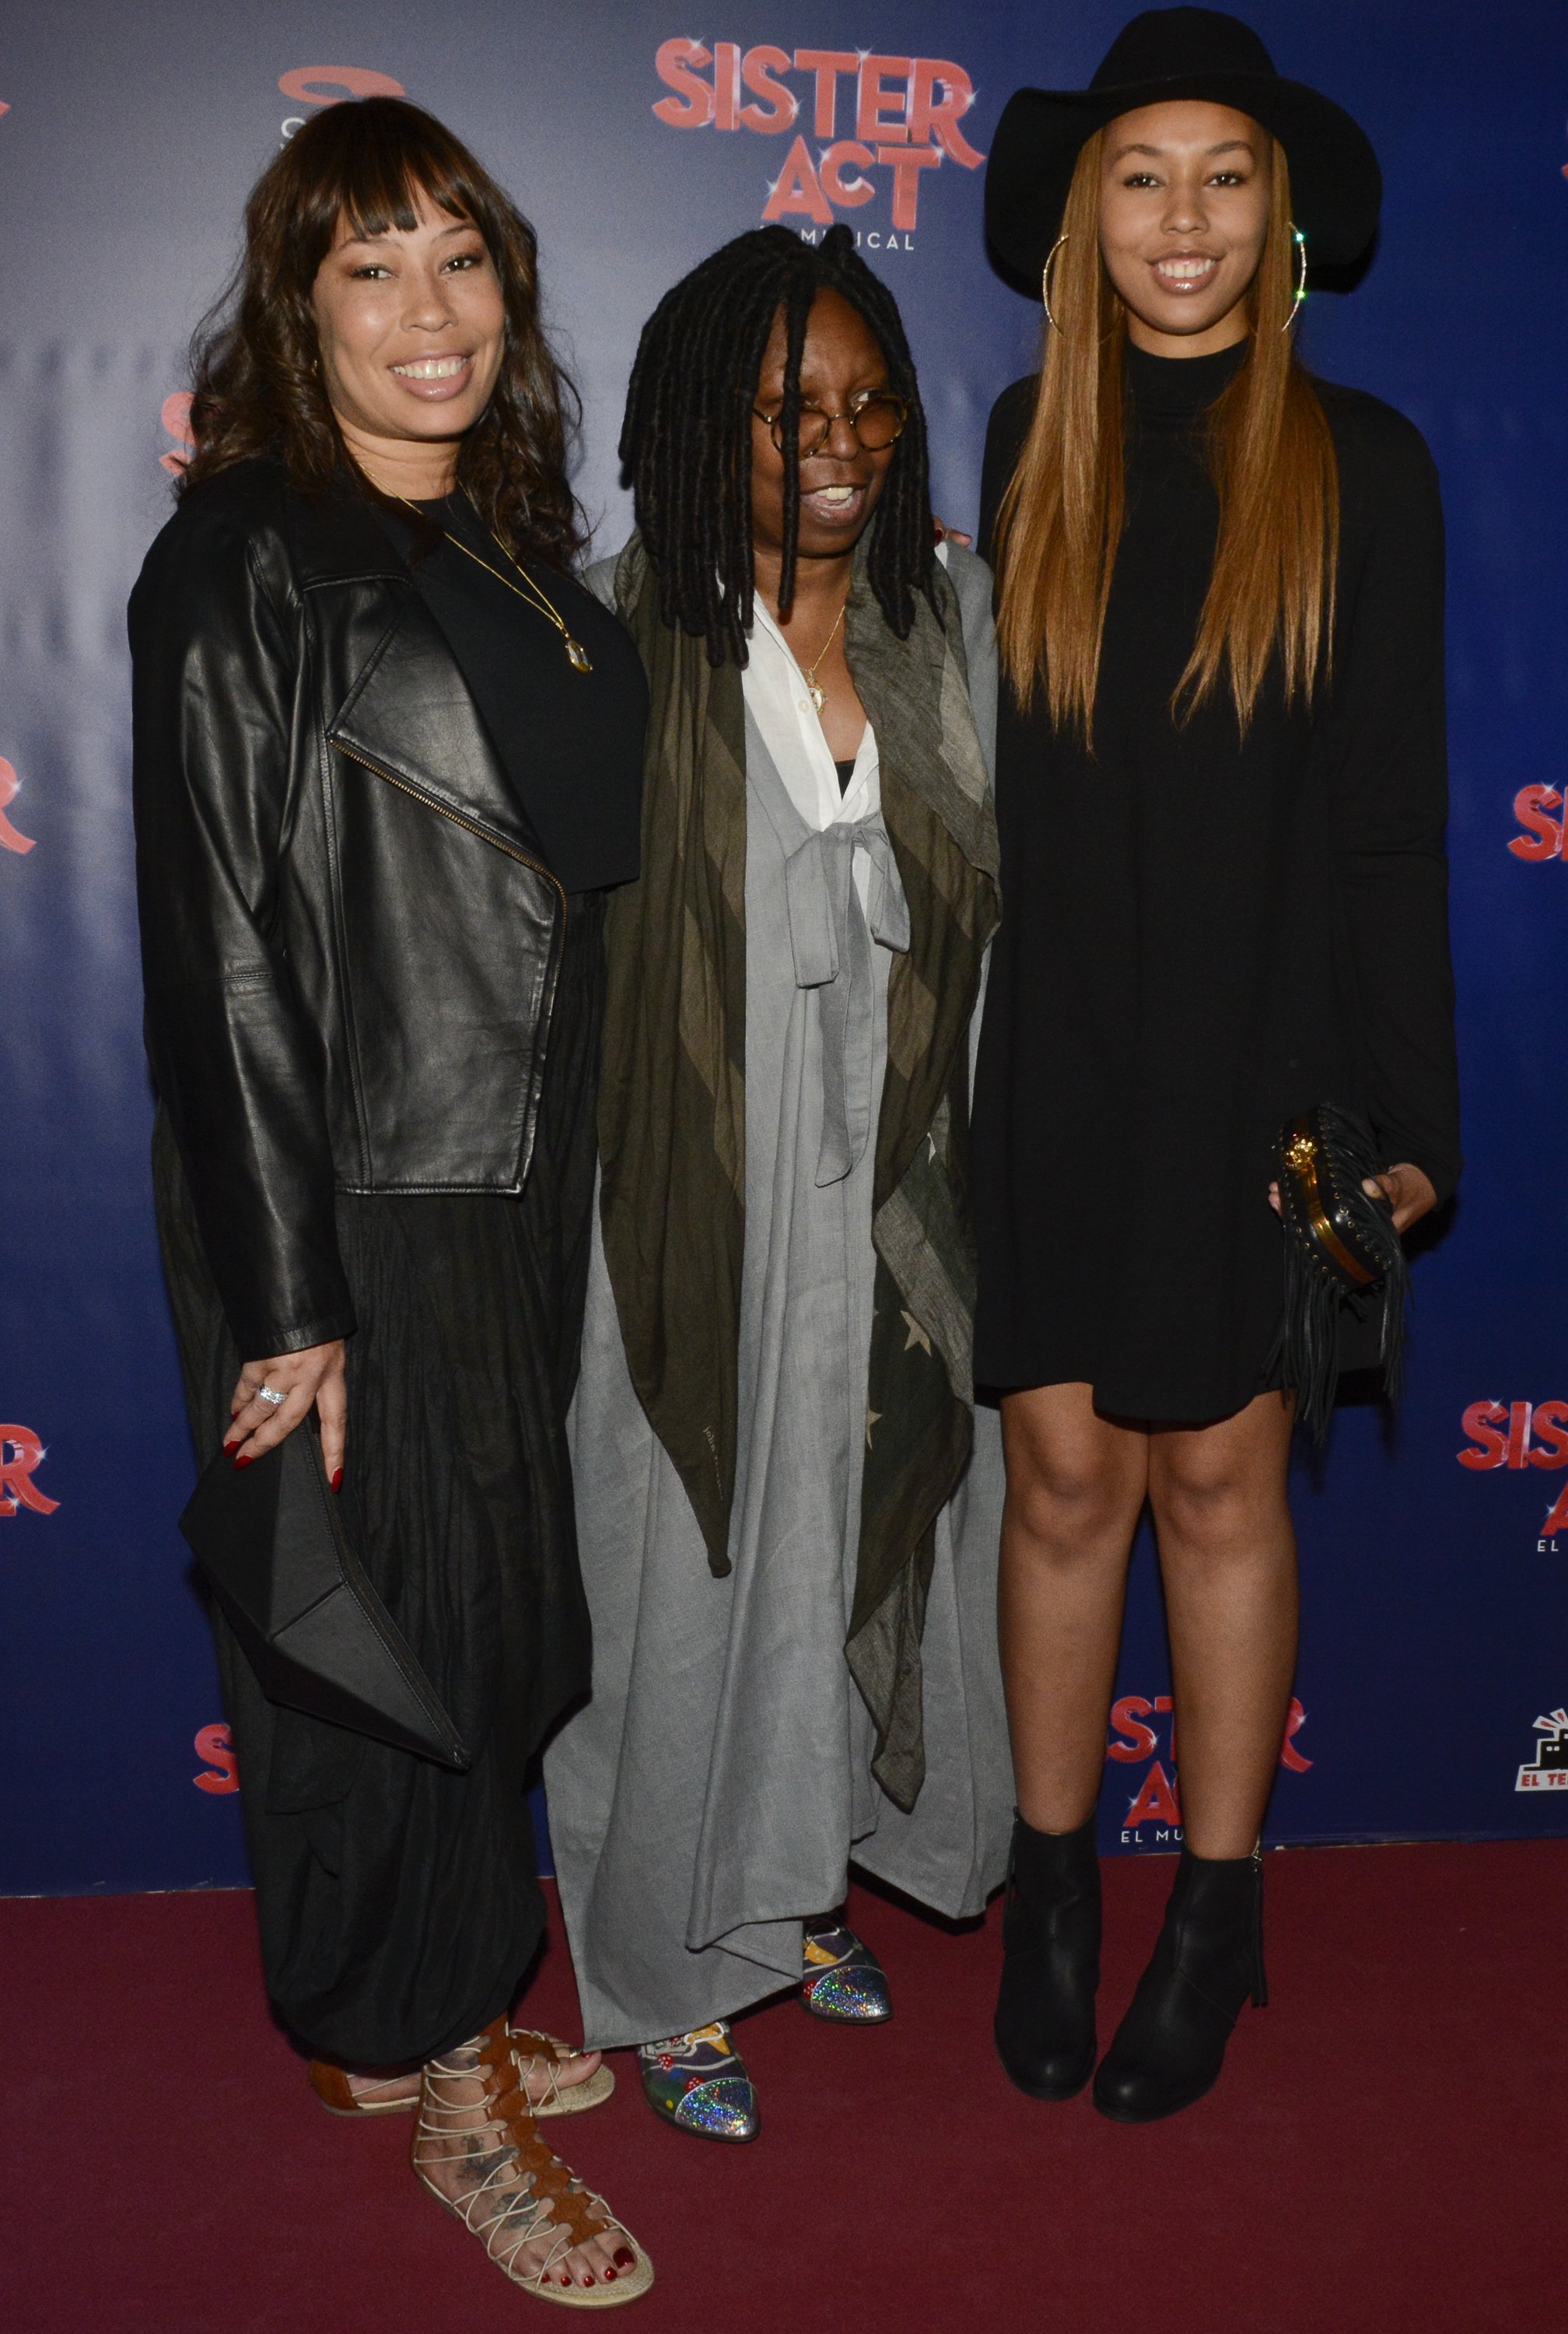 Alex Martin, Whoopi Goldberg, and Martin's daughter Jerzey Kennedy Dean at the premiere of 'Sister Act' on October 23, 2014 in Barcelona, Spain. | Photo: Getty Images